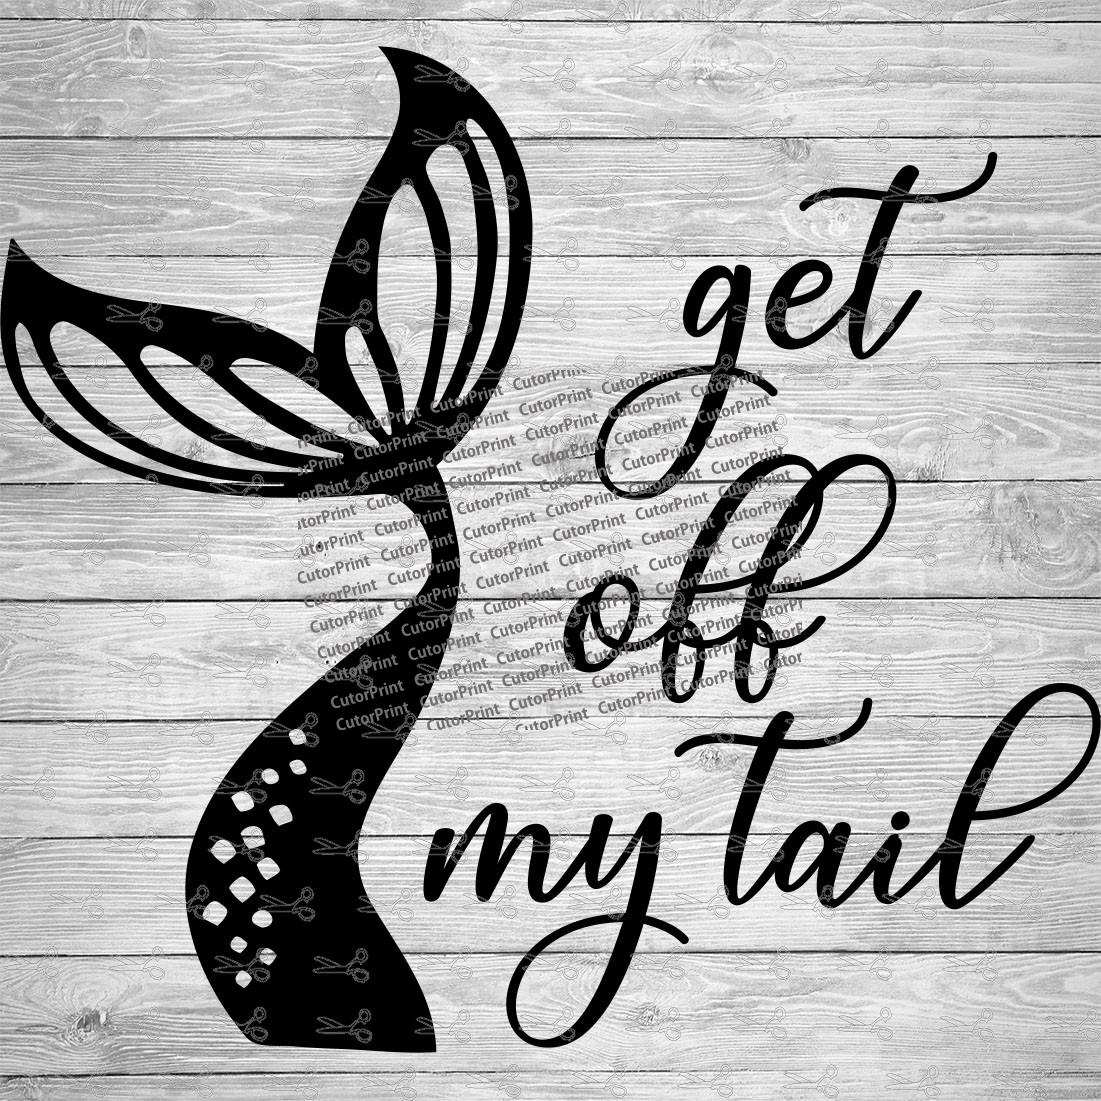 Download Get Off My Tail Mermaid For Car Decal Svg Dxf File For Cutting Machines Like Silhouette Cameo And Cricut Commercial Use Digital Design Visual Arts Craft Supplies Tools Kromasol Com